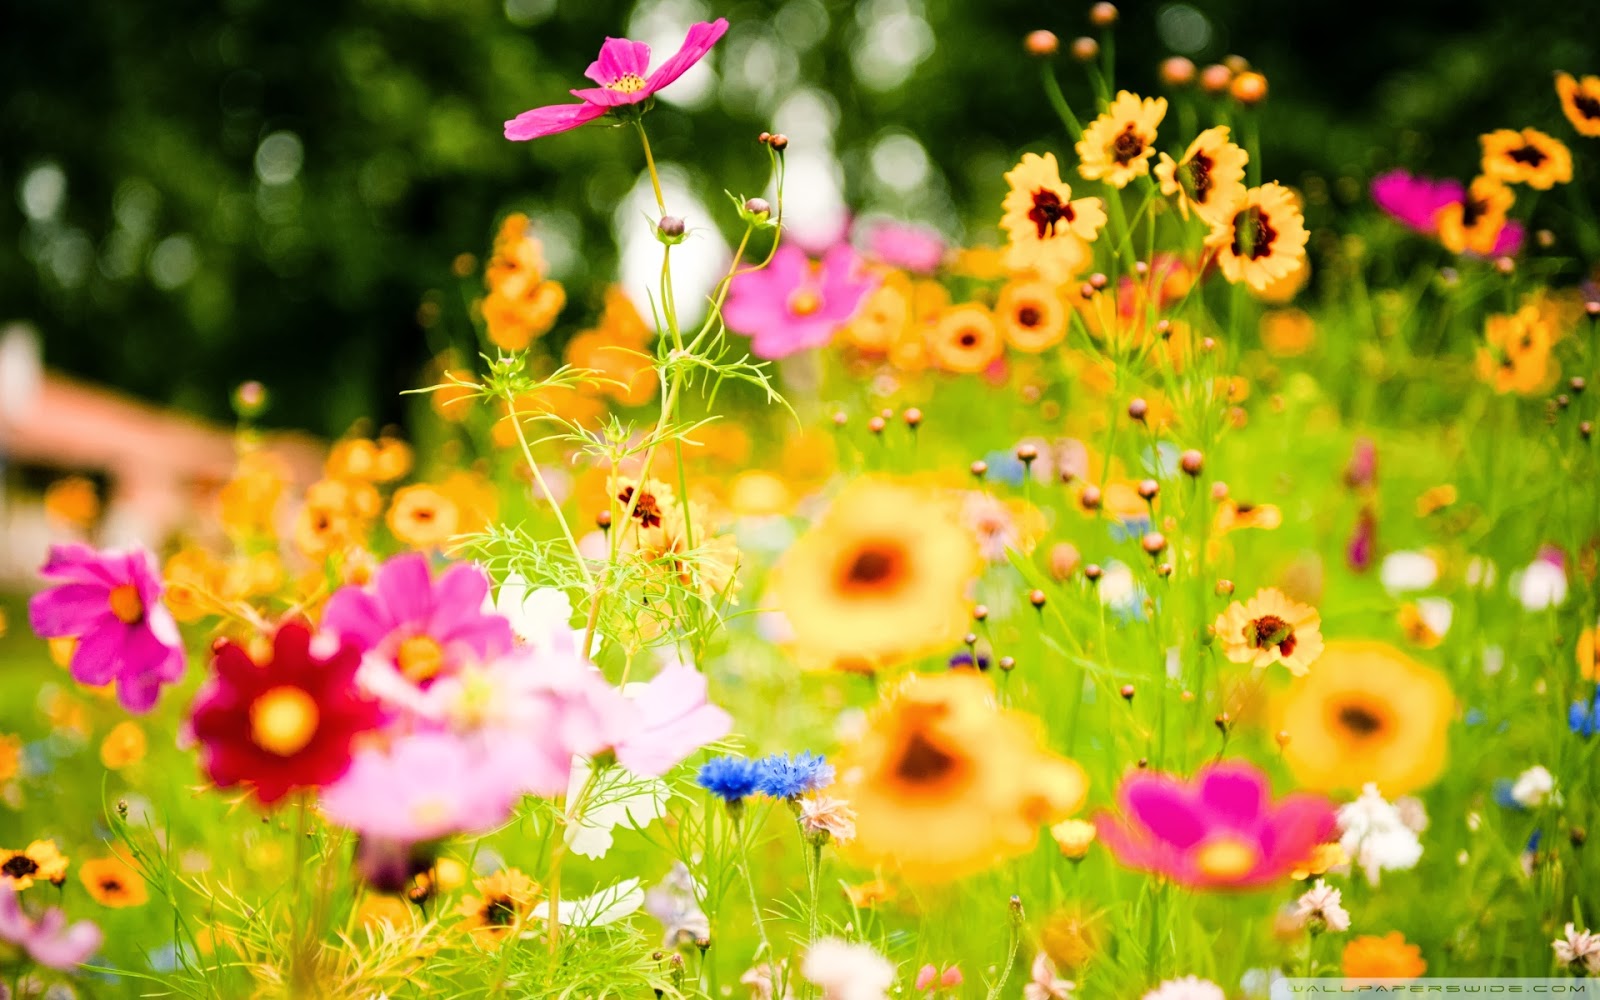  Summer flowers wallpaper and make this Summer flowers wallpaper for 1600x1000